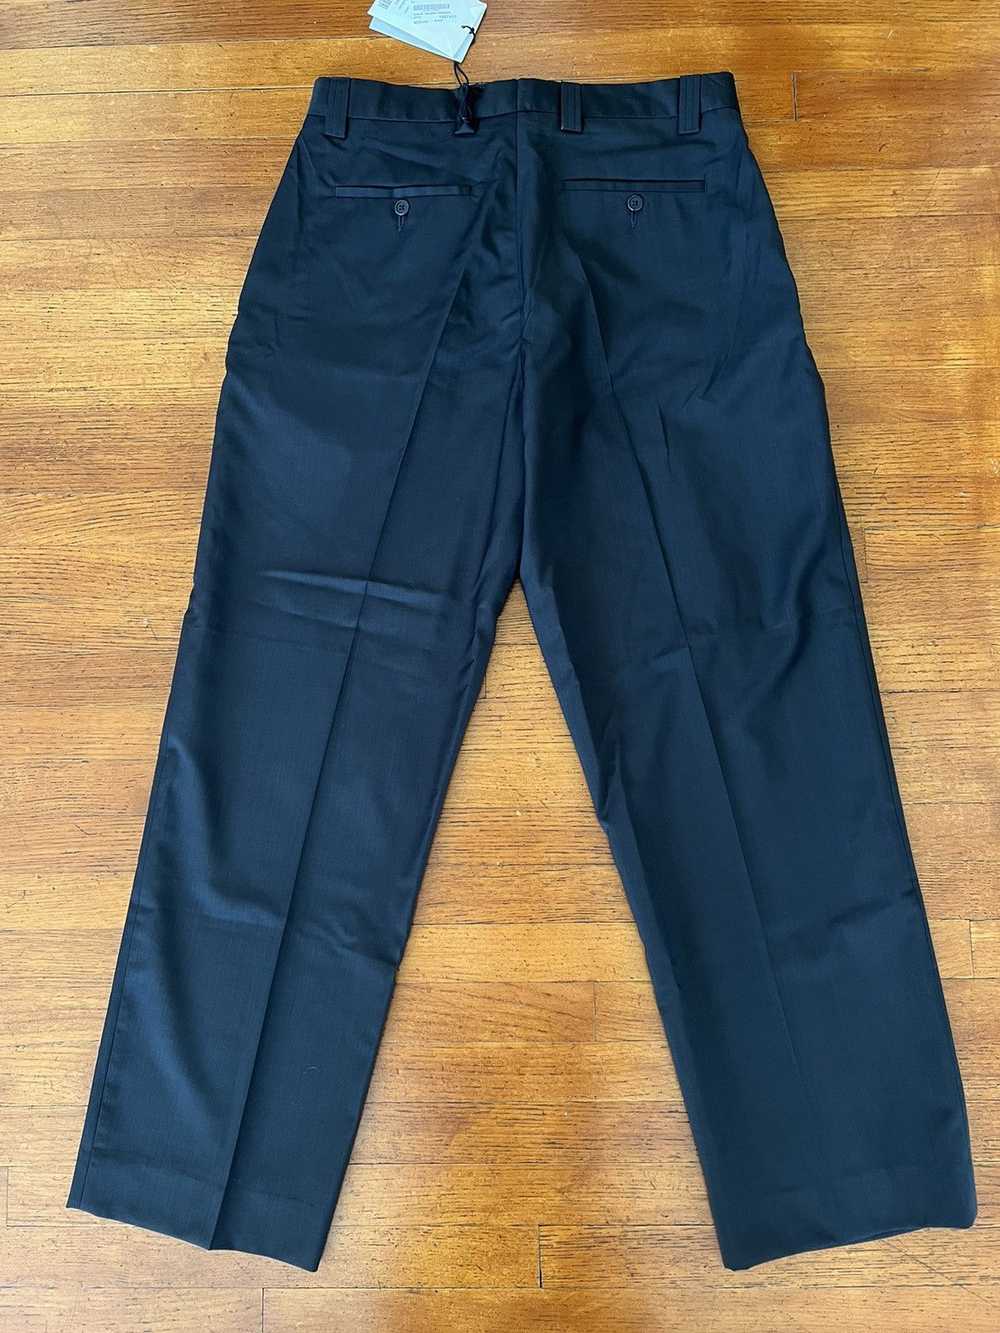 Mfpen Studio Trousers Brand New With Tags - image 4